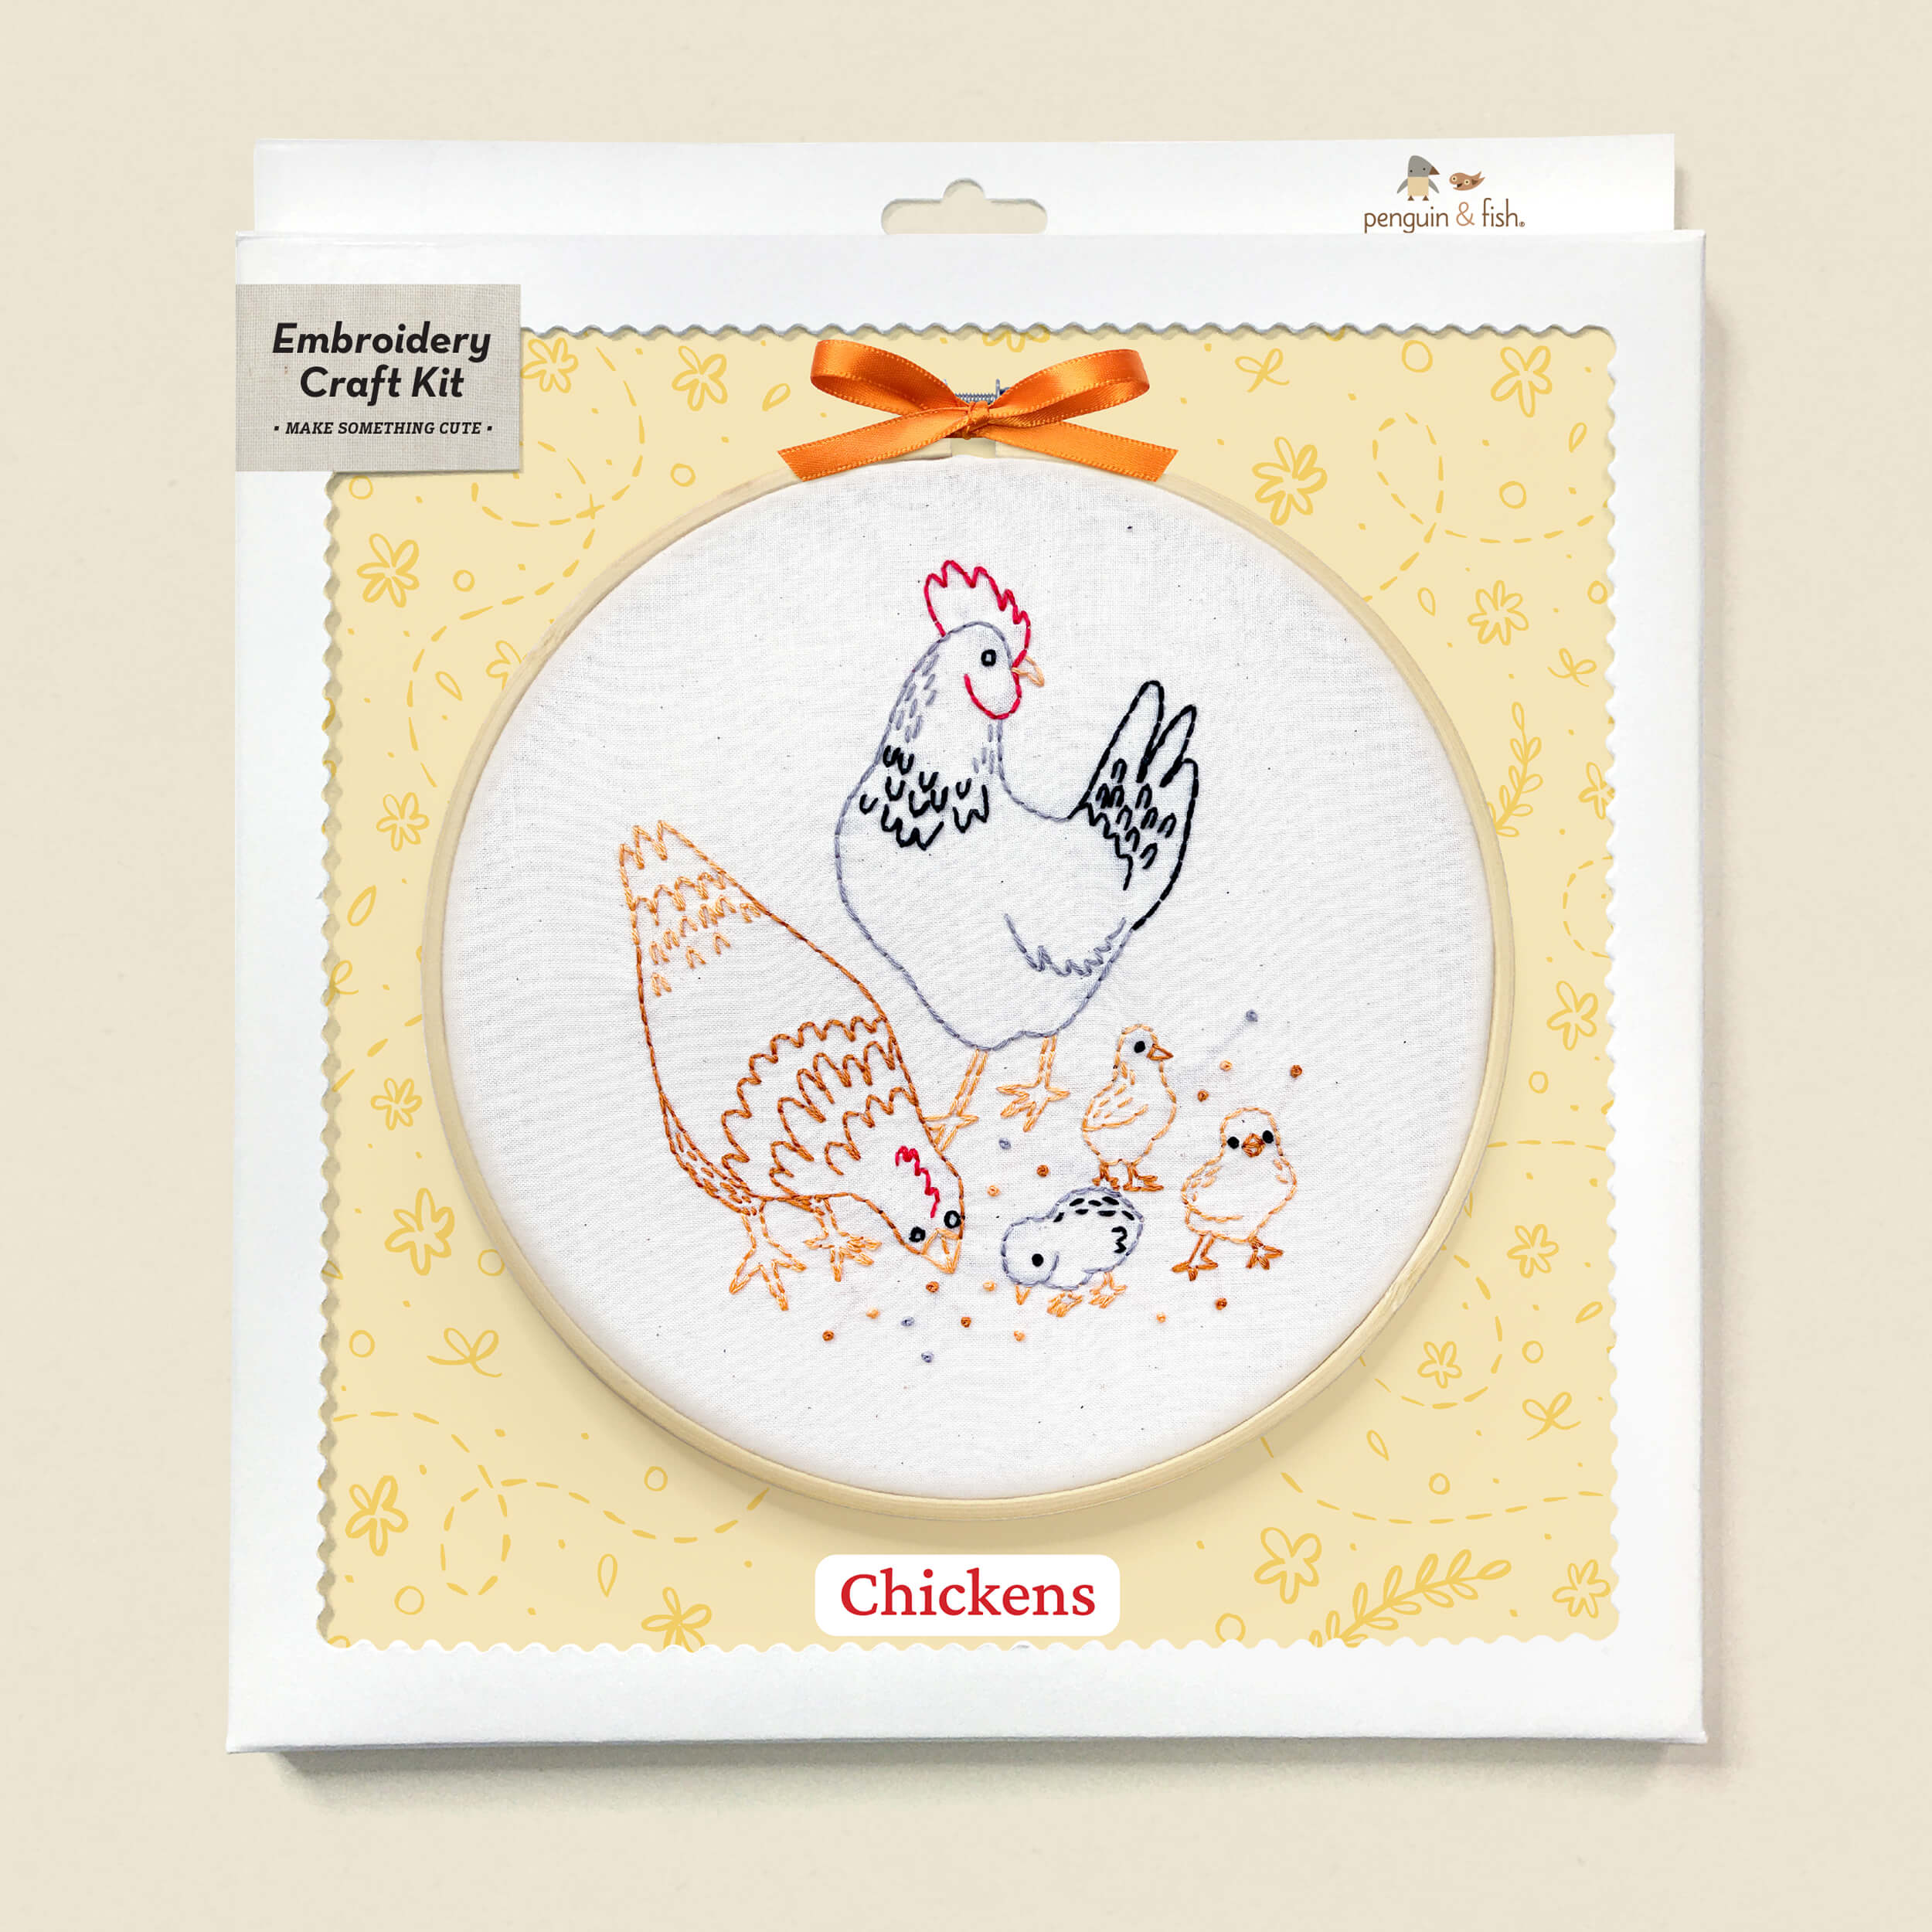 Chickens embroidery kit in a box